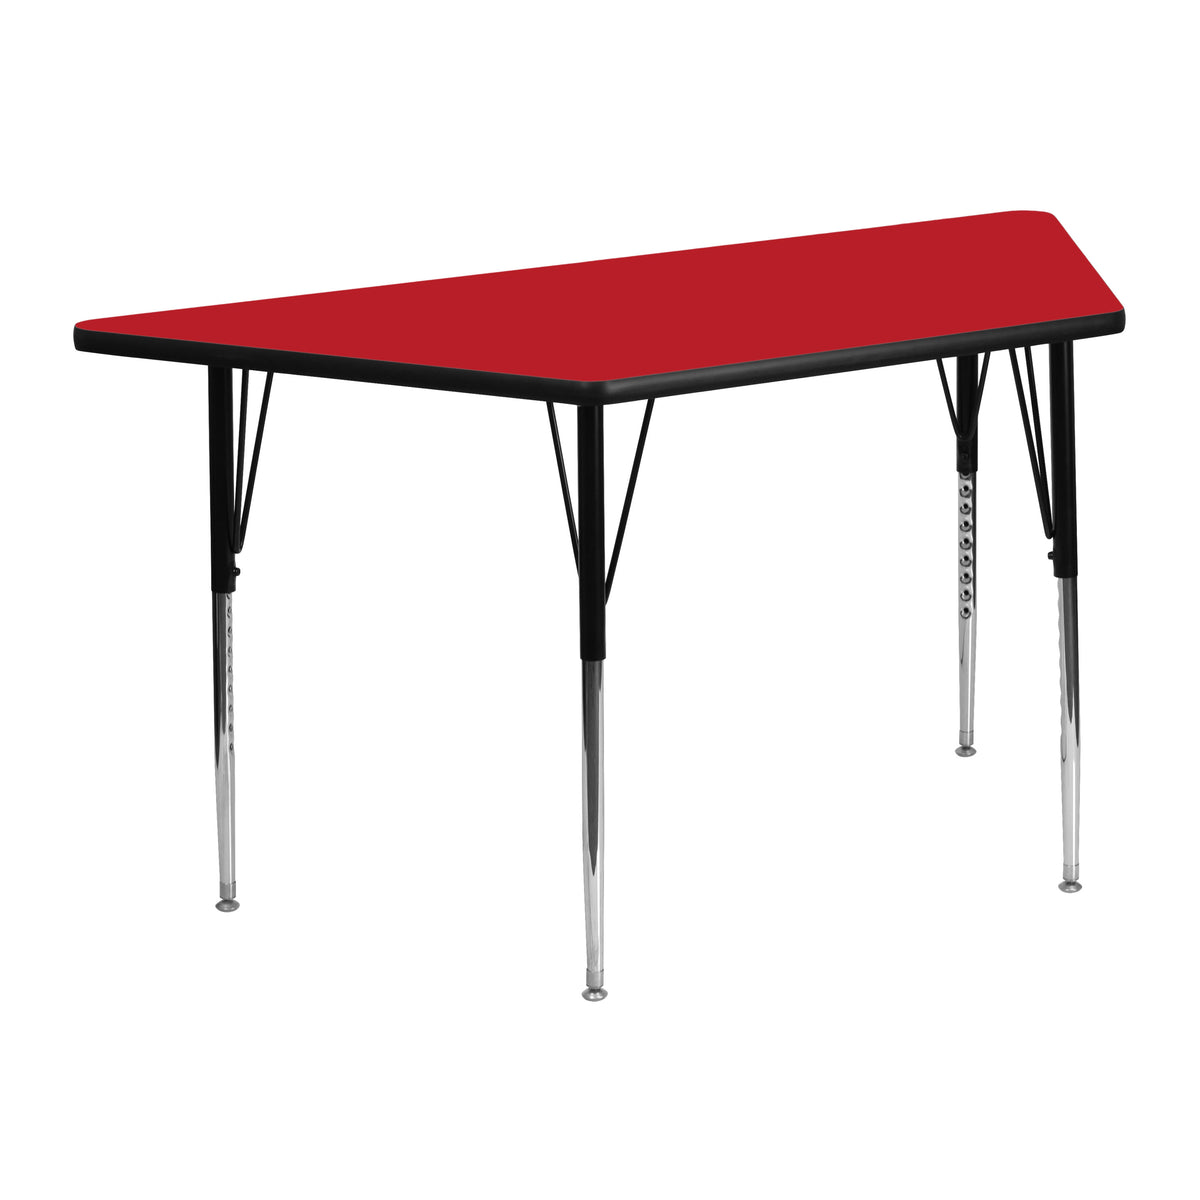 Red |#| 22.5inchW x 45inchL Trapezoid Red HP Laminate Activity Table - Height Adjustable Legs